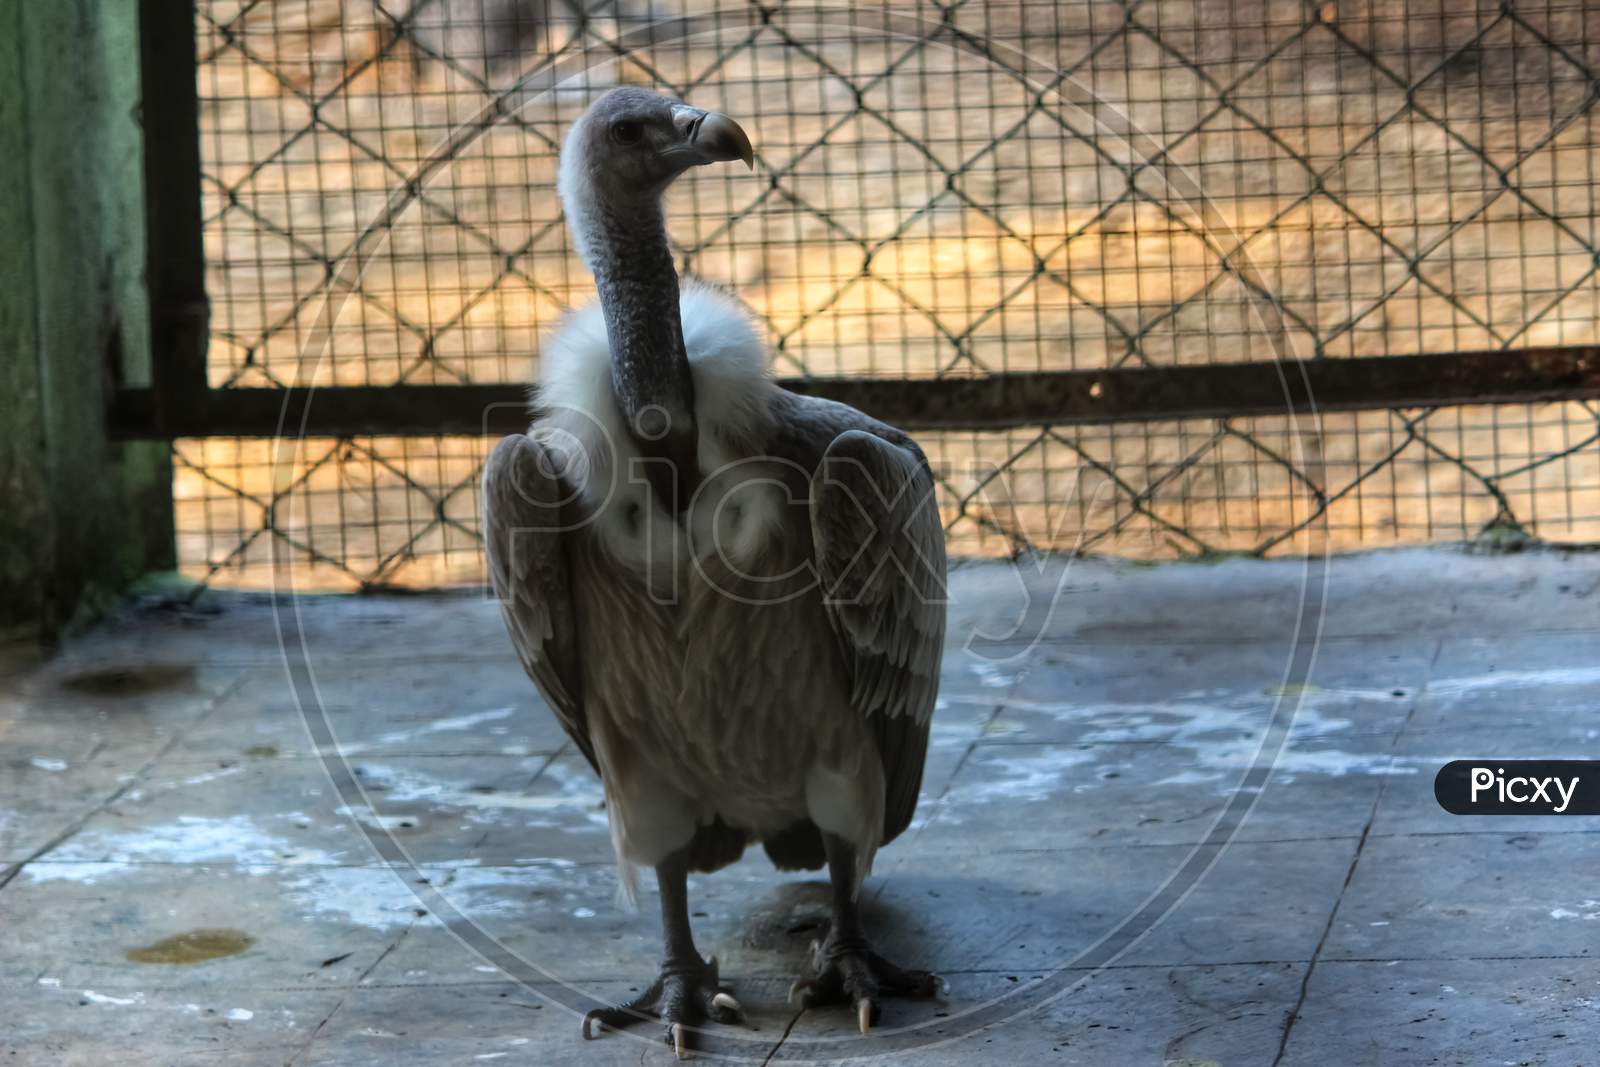 A Vulture Roaming In Cage